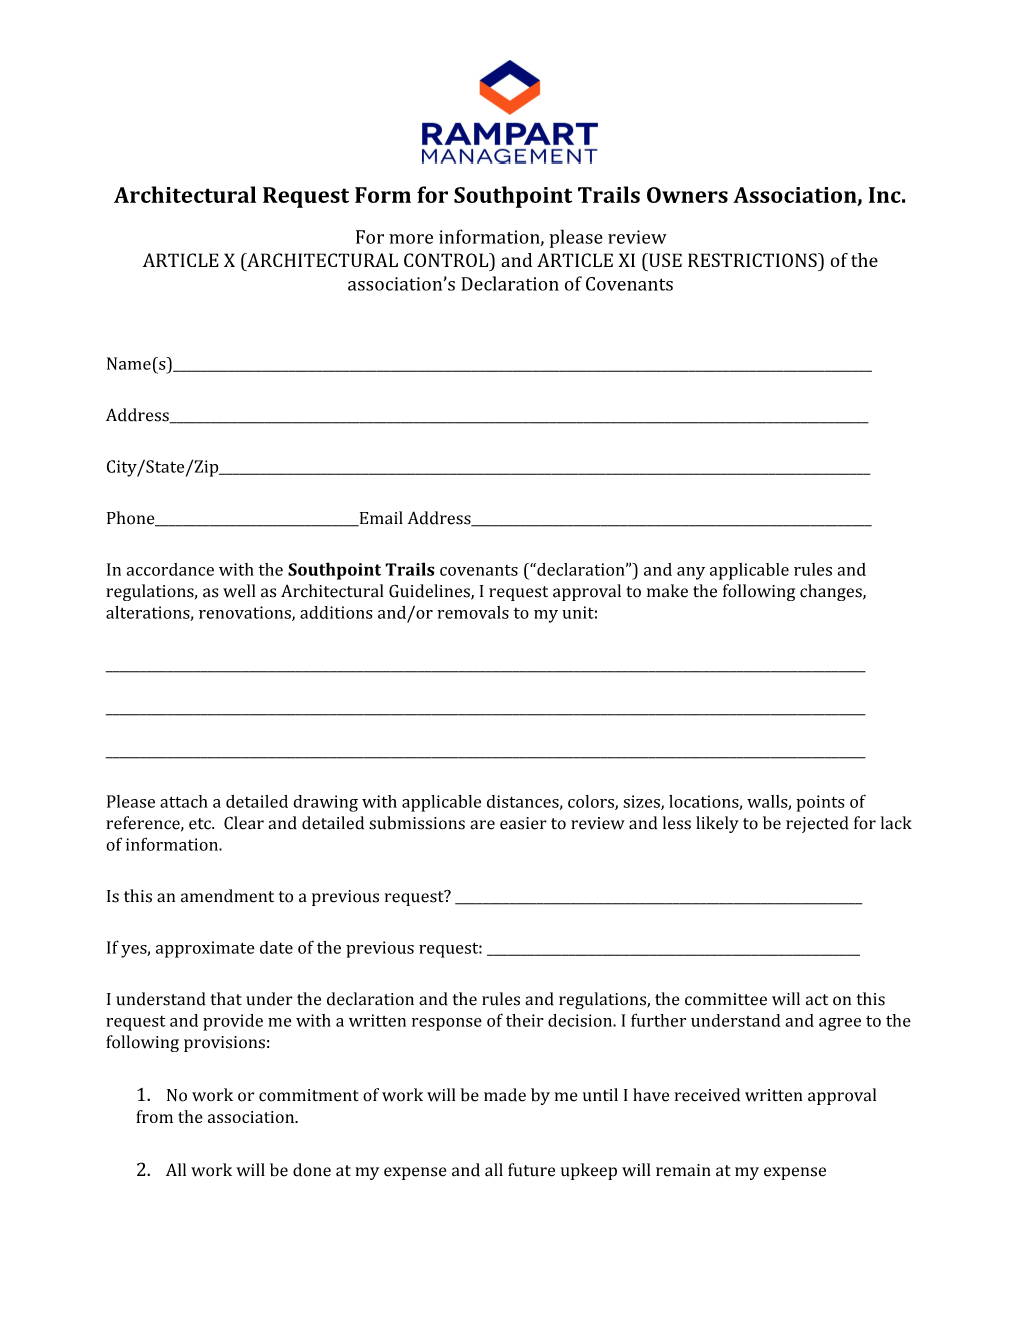 Architectural Request Form for Southpoint Trails Owners Association, Inc